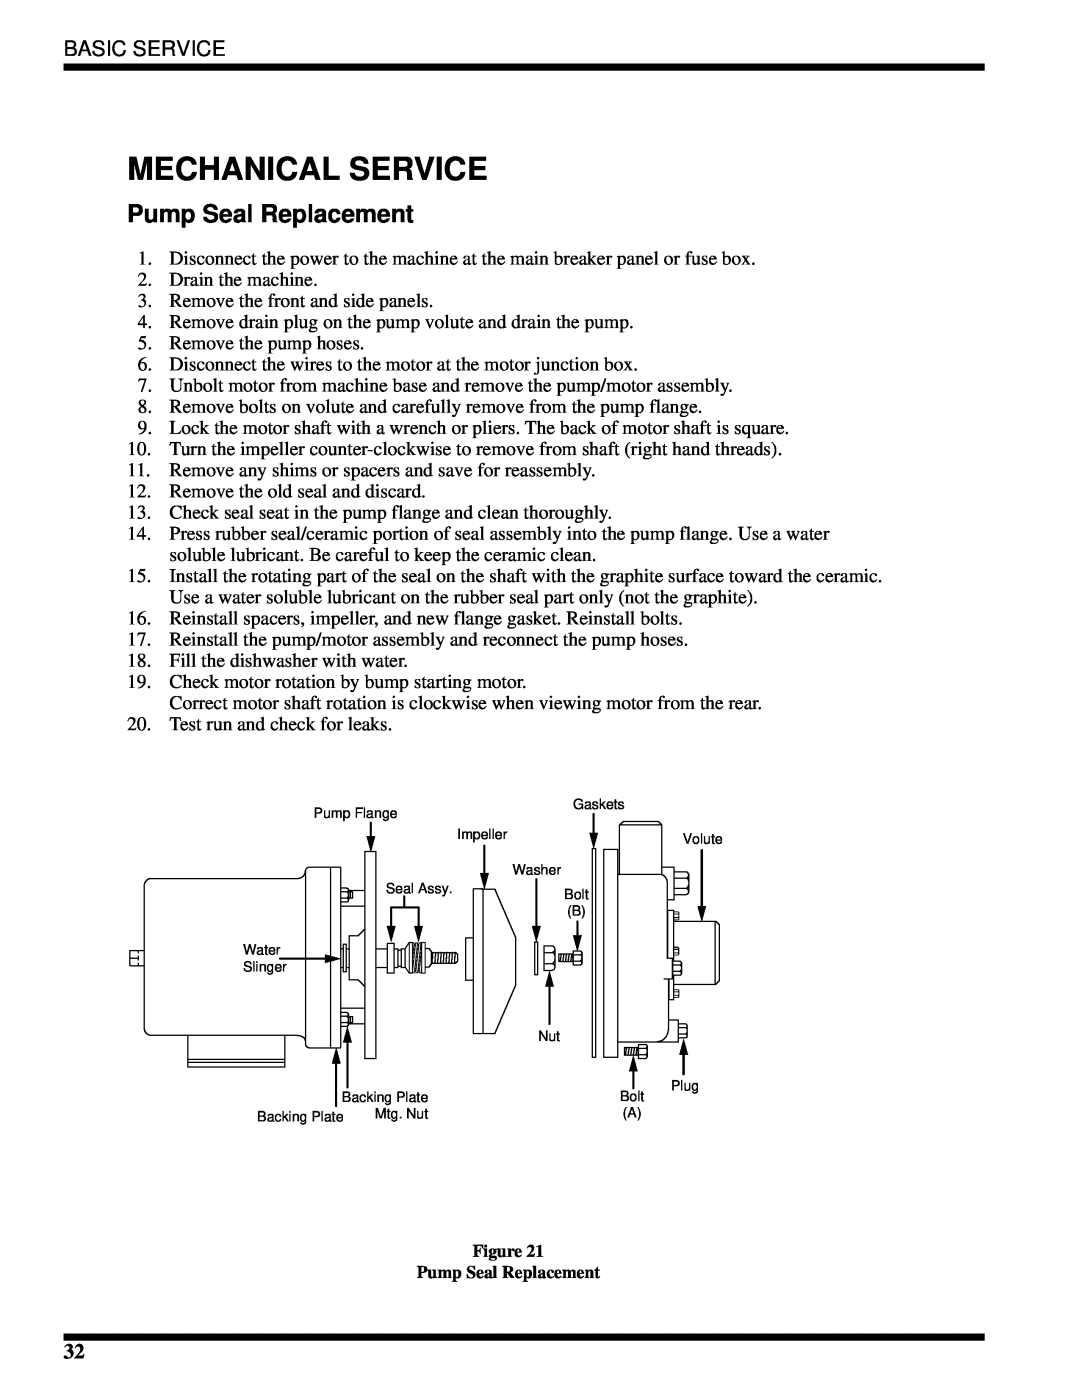 Moyer Diebel MH-60M2, MH-6NM2, MH-6LM2 technical manual Mechanical Service, Pump Seal Replacement, Basic Service 